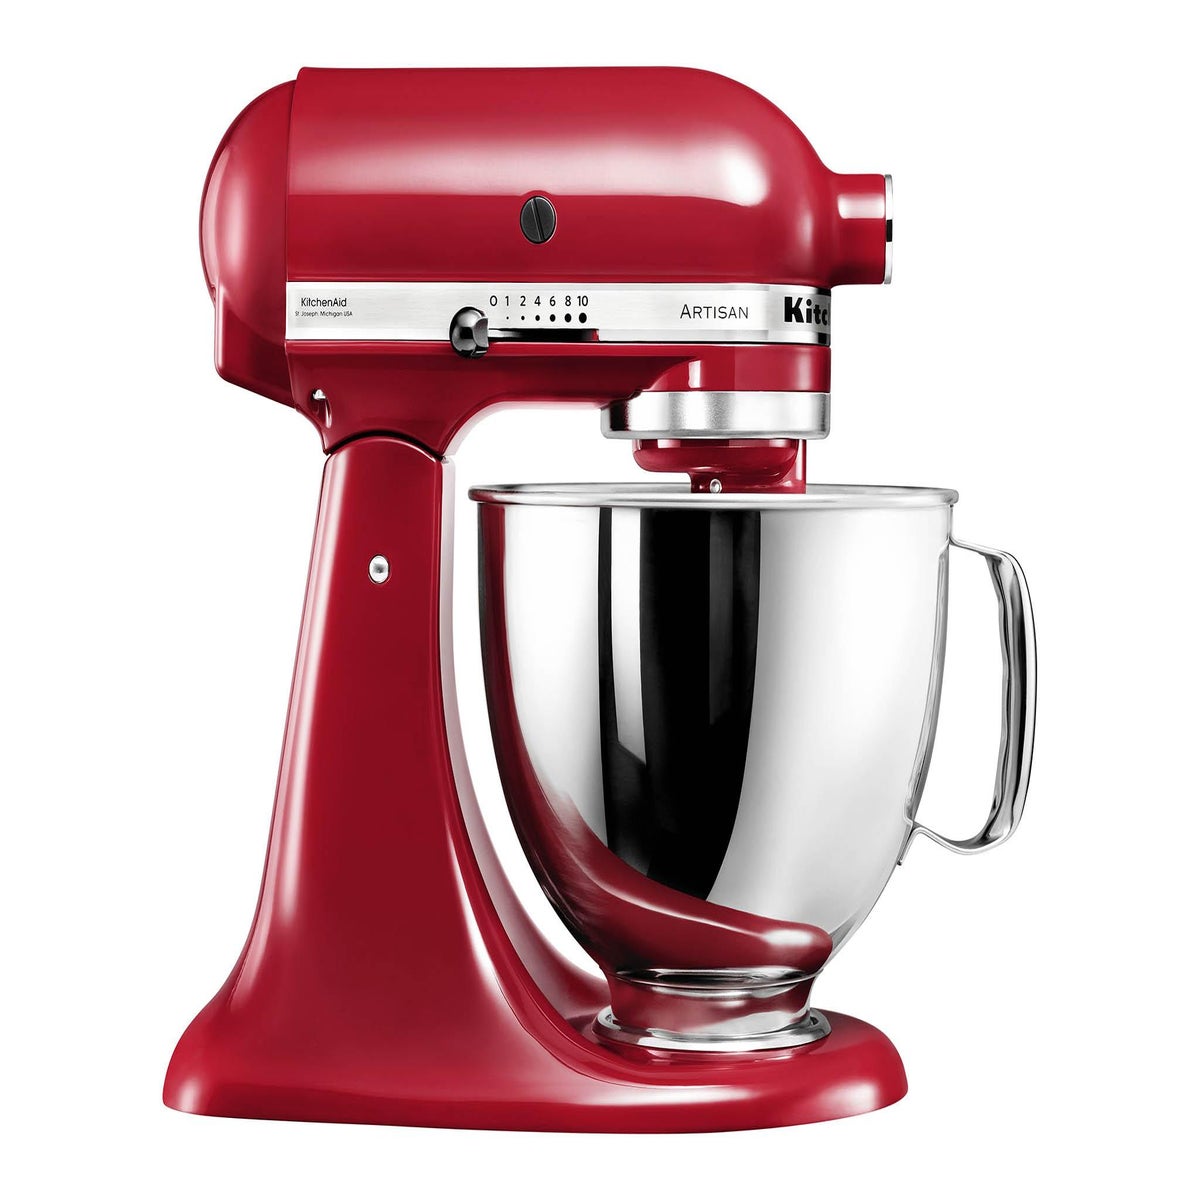 https://static.independent.co.uk/s3fs-public/thumbnails/image/2017/04/28/09/kitchenaid-1.jpg?width=1200&height=1200&fit=crop